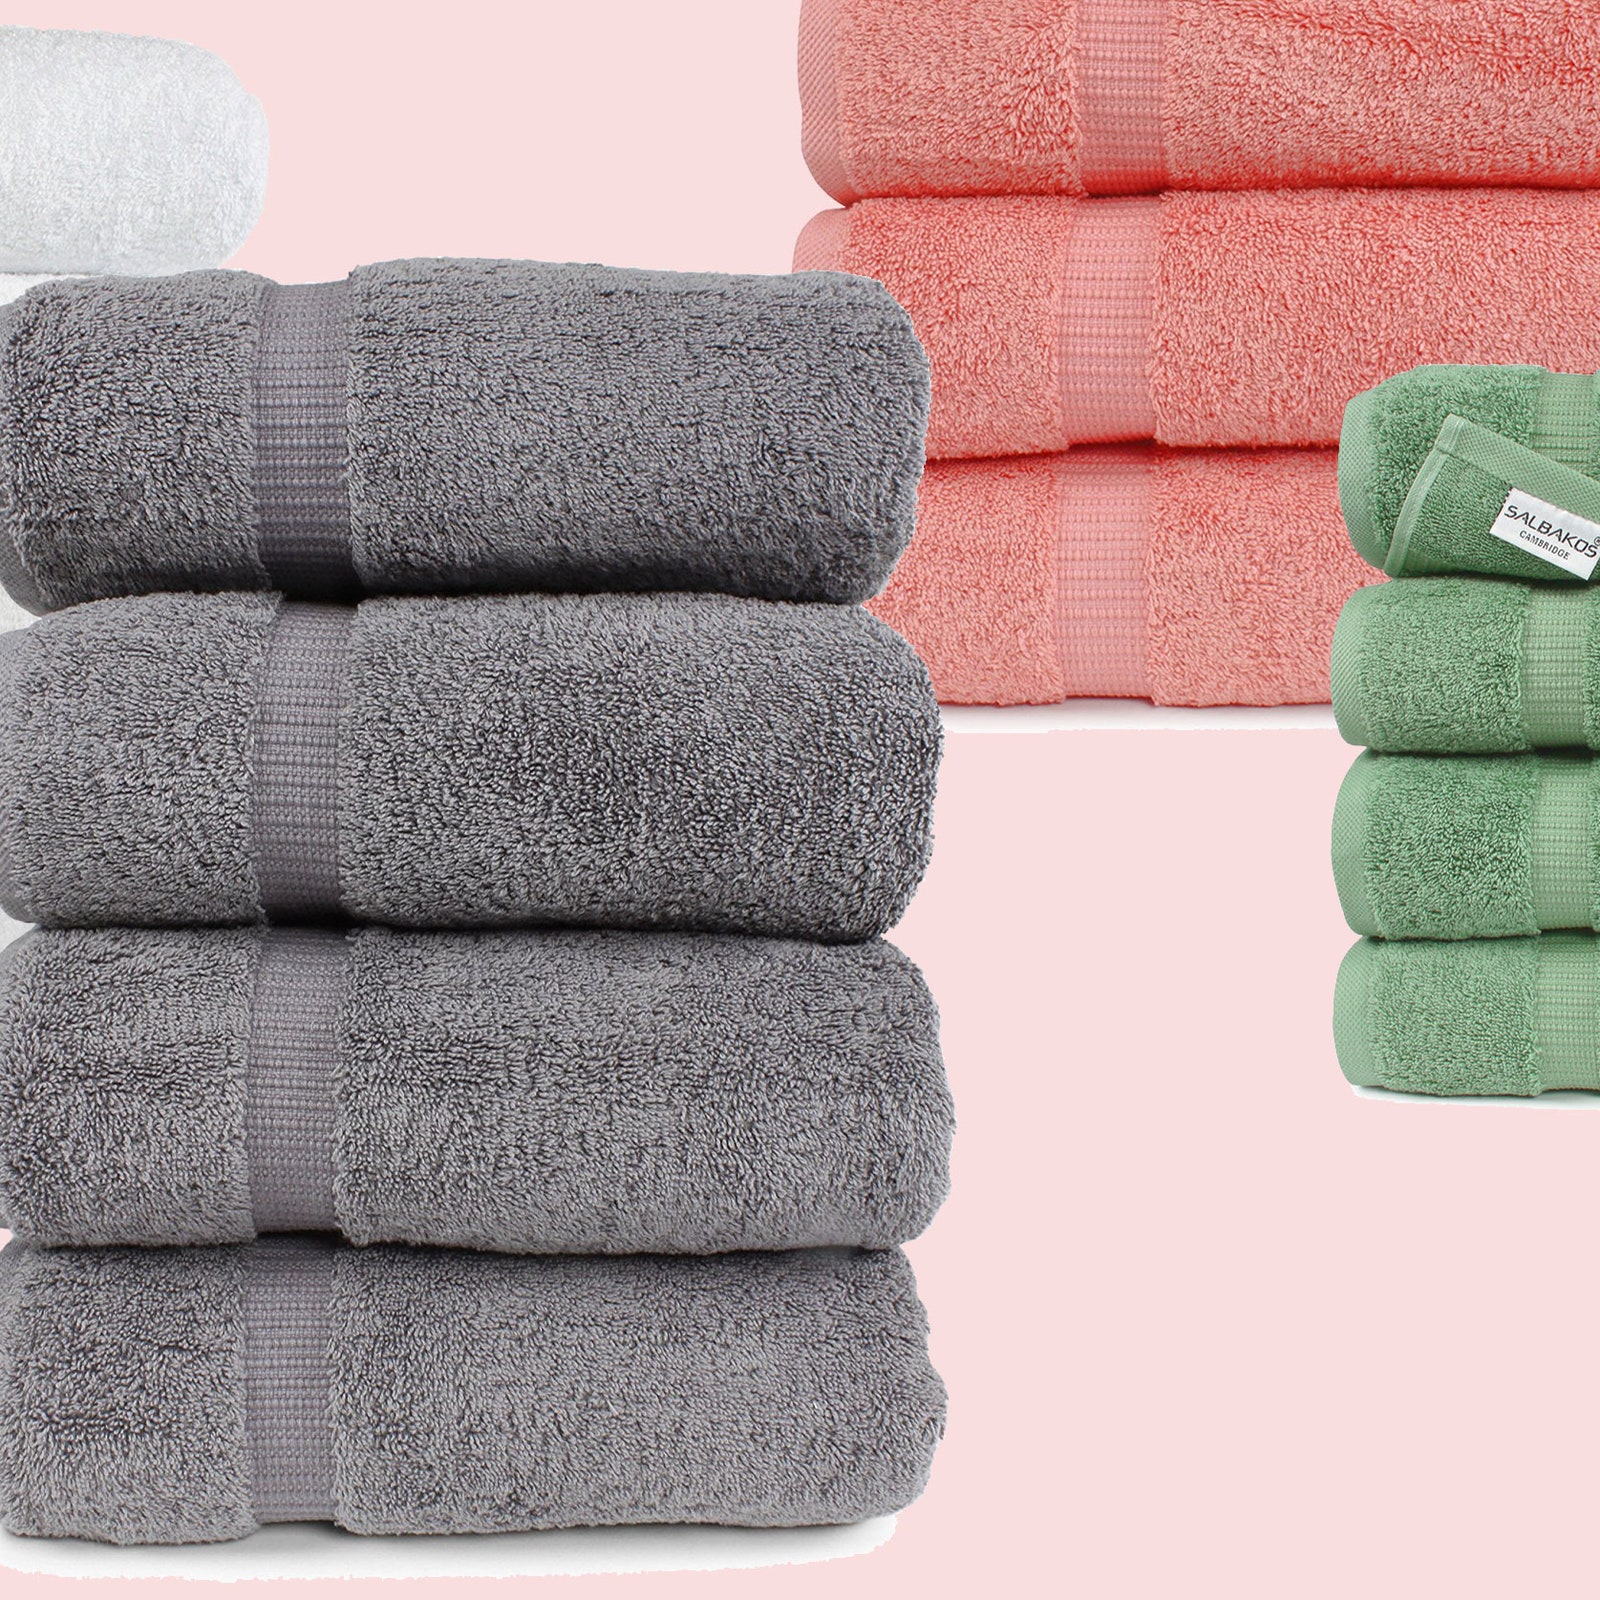 11 Best Bath Towels on Amazon, According to More Than 16,000 Reviewers